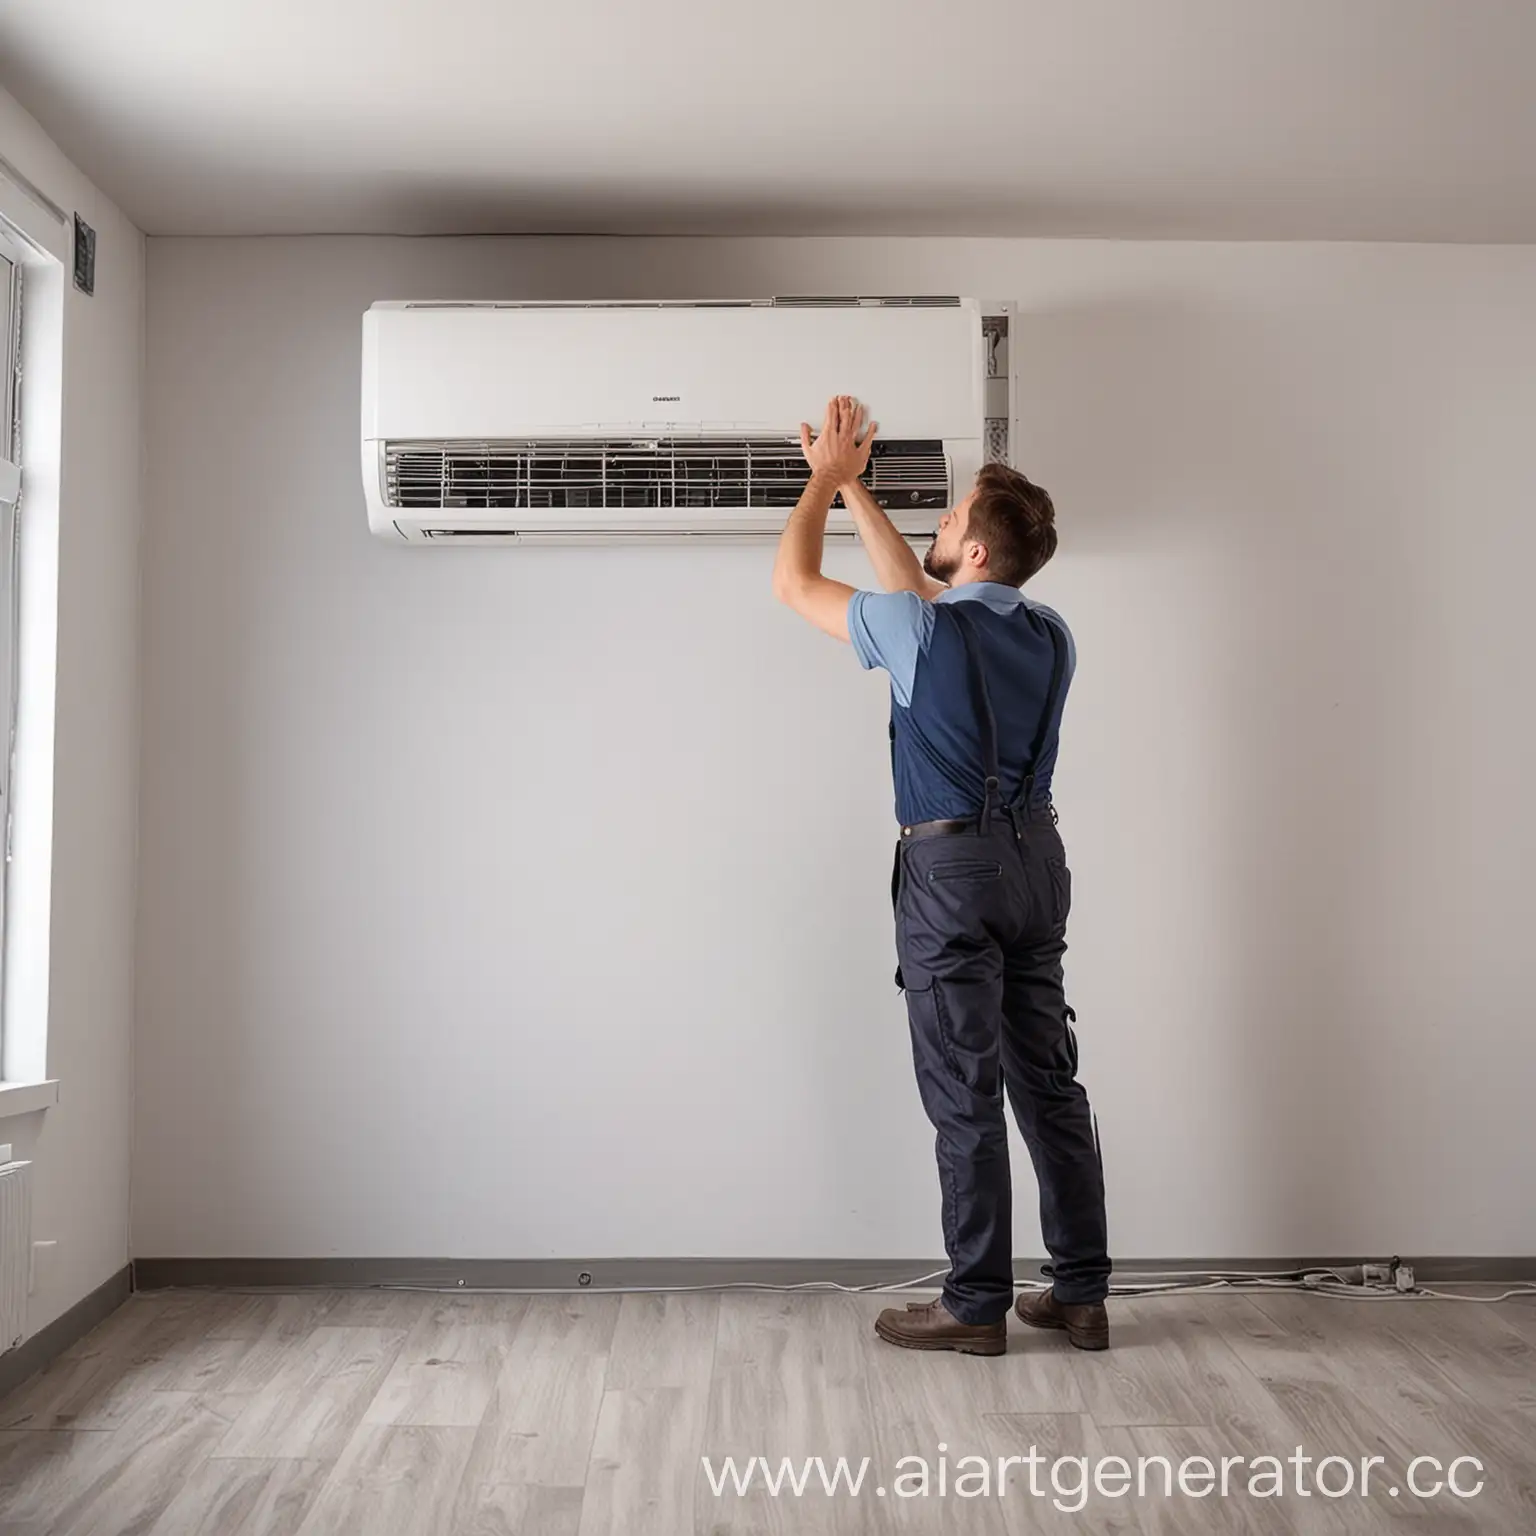 Office-Air-Conditioning-Installation-Efficient-Workplace-Cooling-Solution